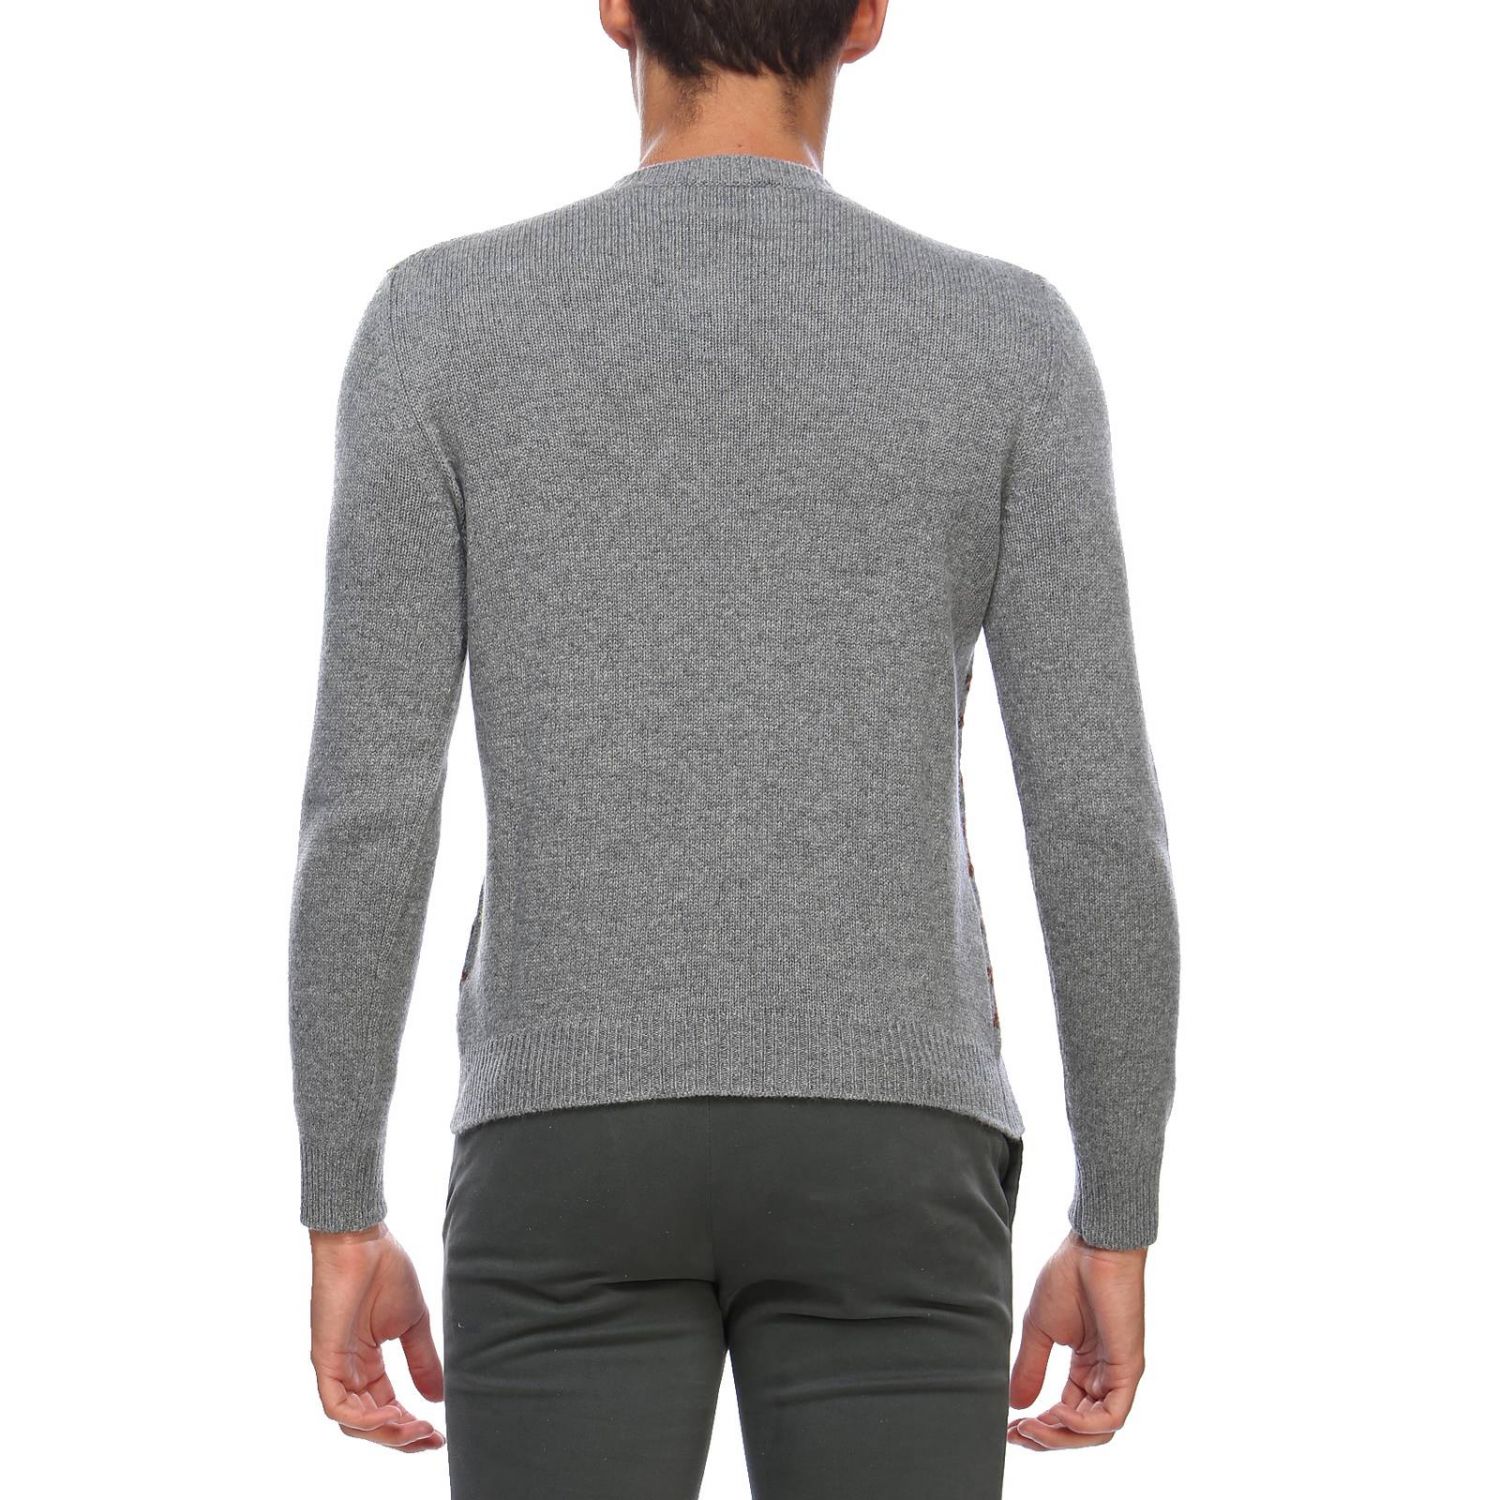 PRADA: Crew-neck pullover in blend wool and fantasy cashmere | Sweater